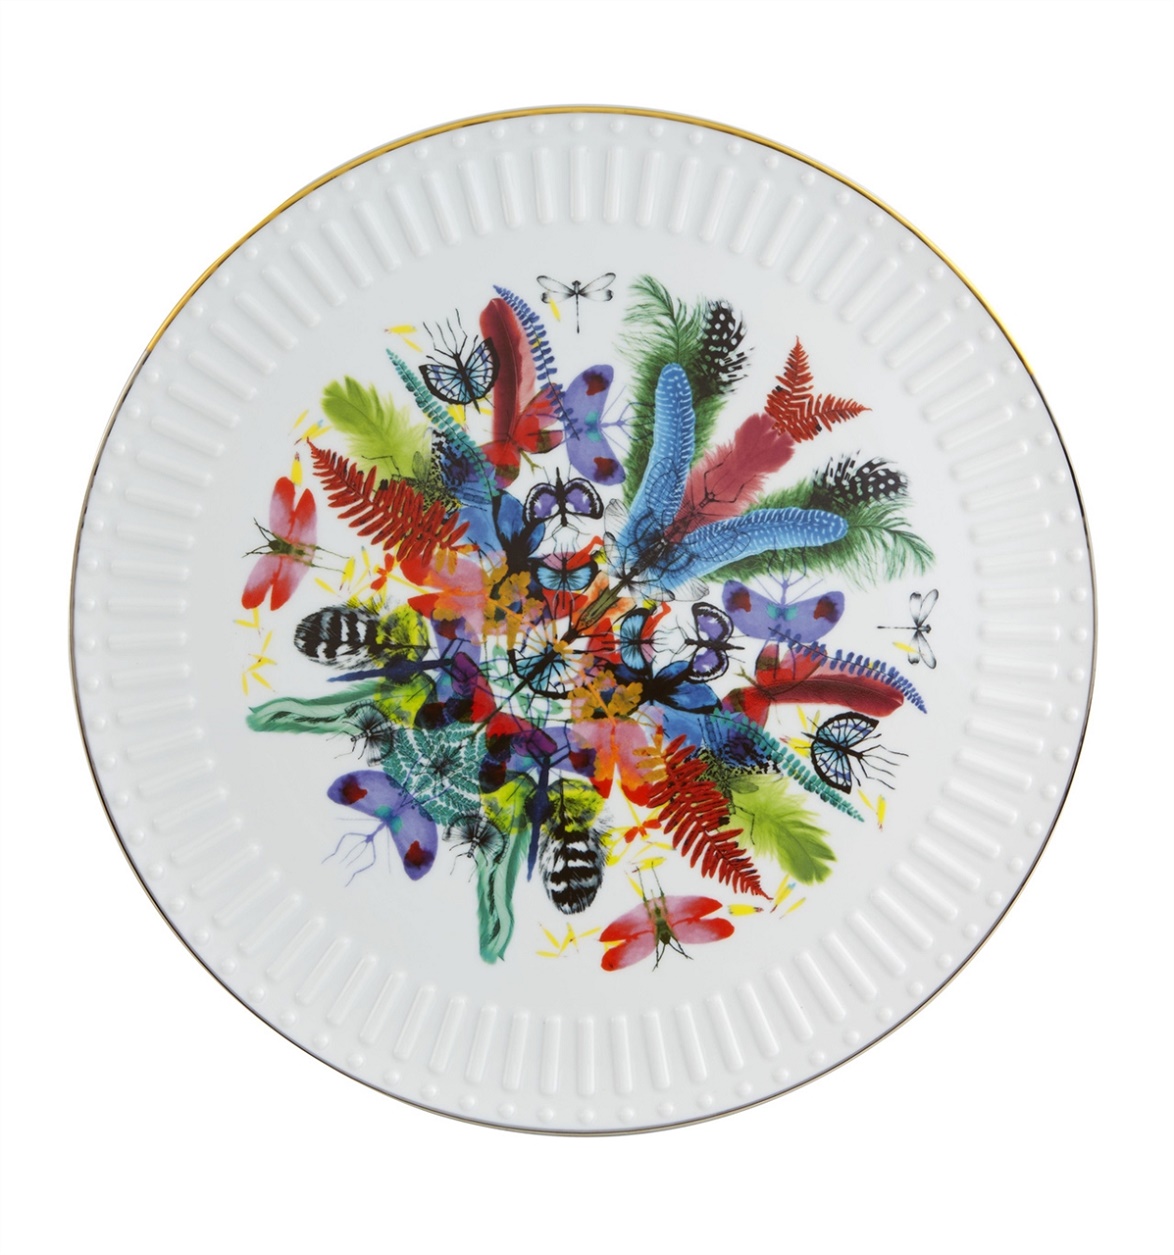 Vista Alegre Collection Caribe charger plate by Christian Lacroix